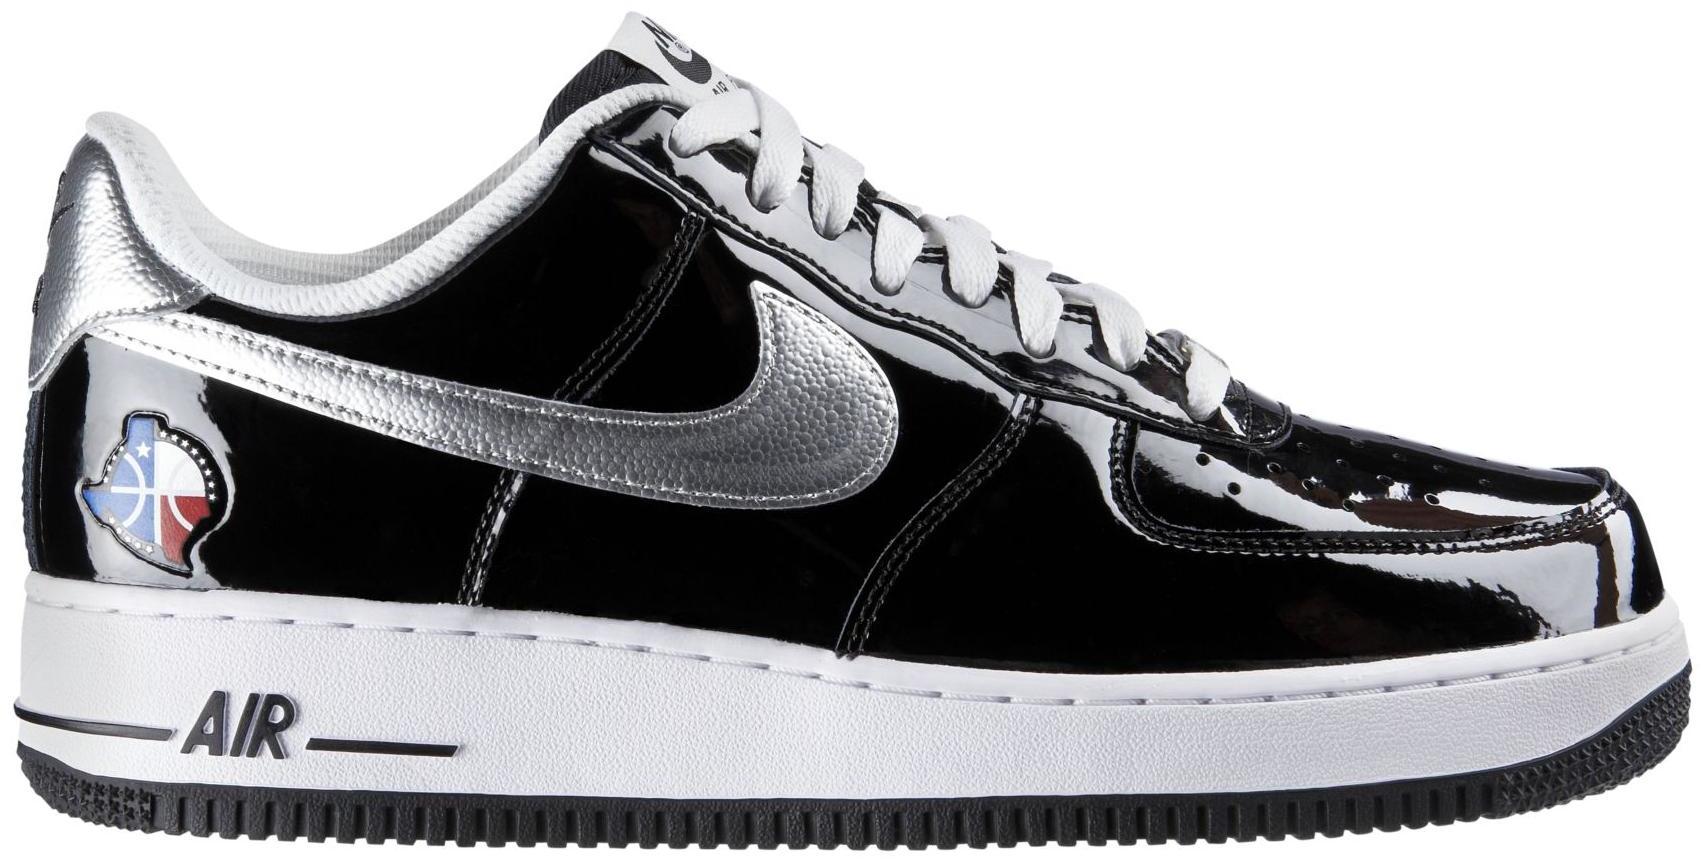 Nike Air Force 1 Low All-Star (2010) - 315122-018 - US